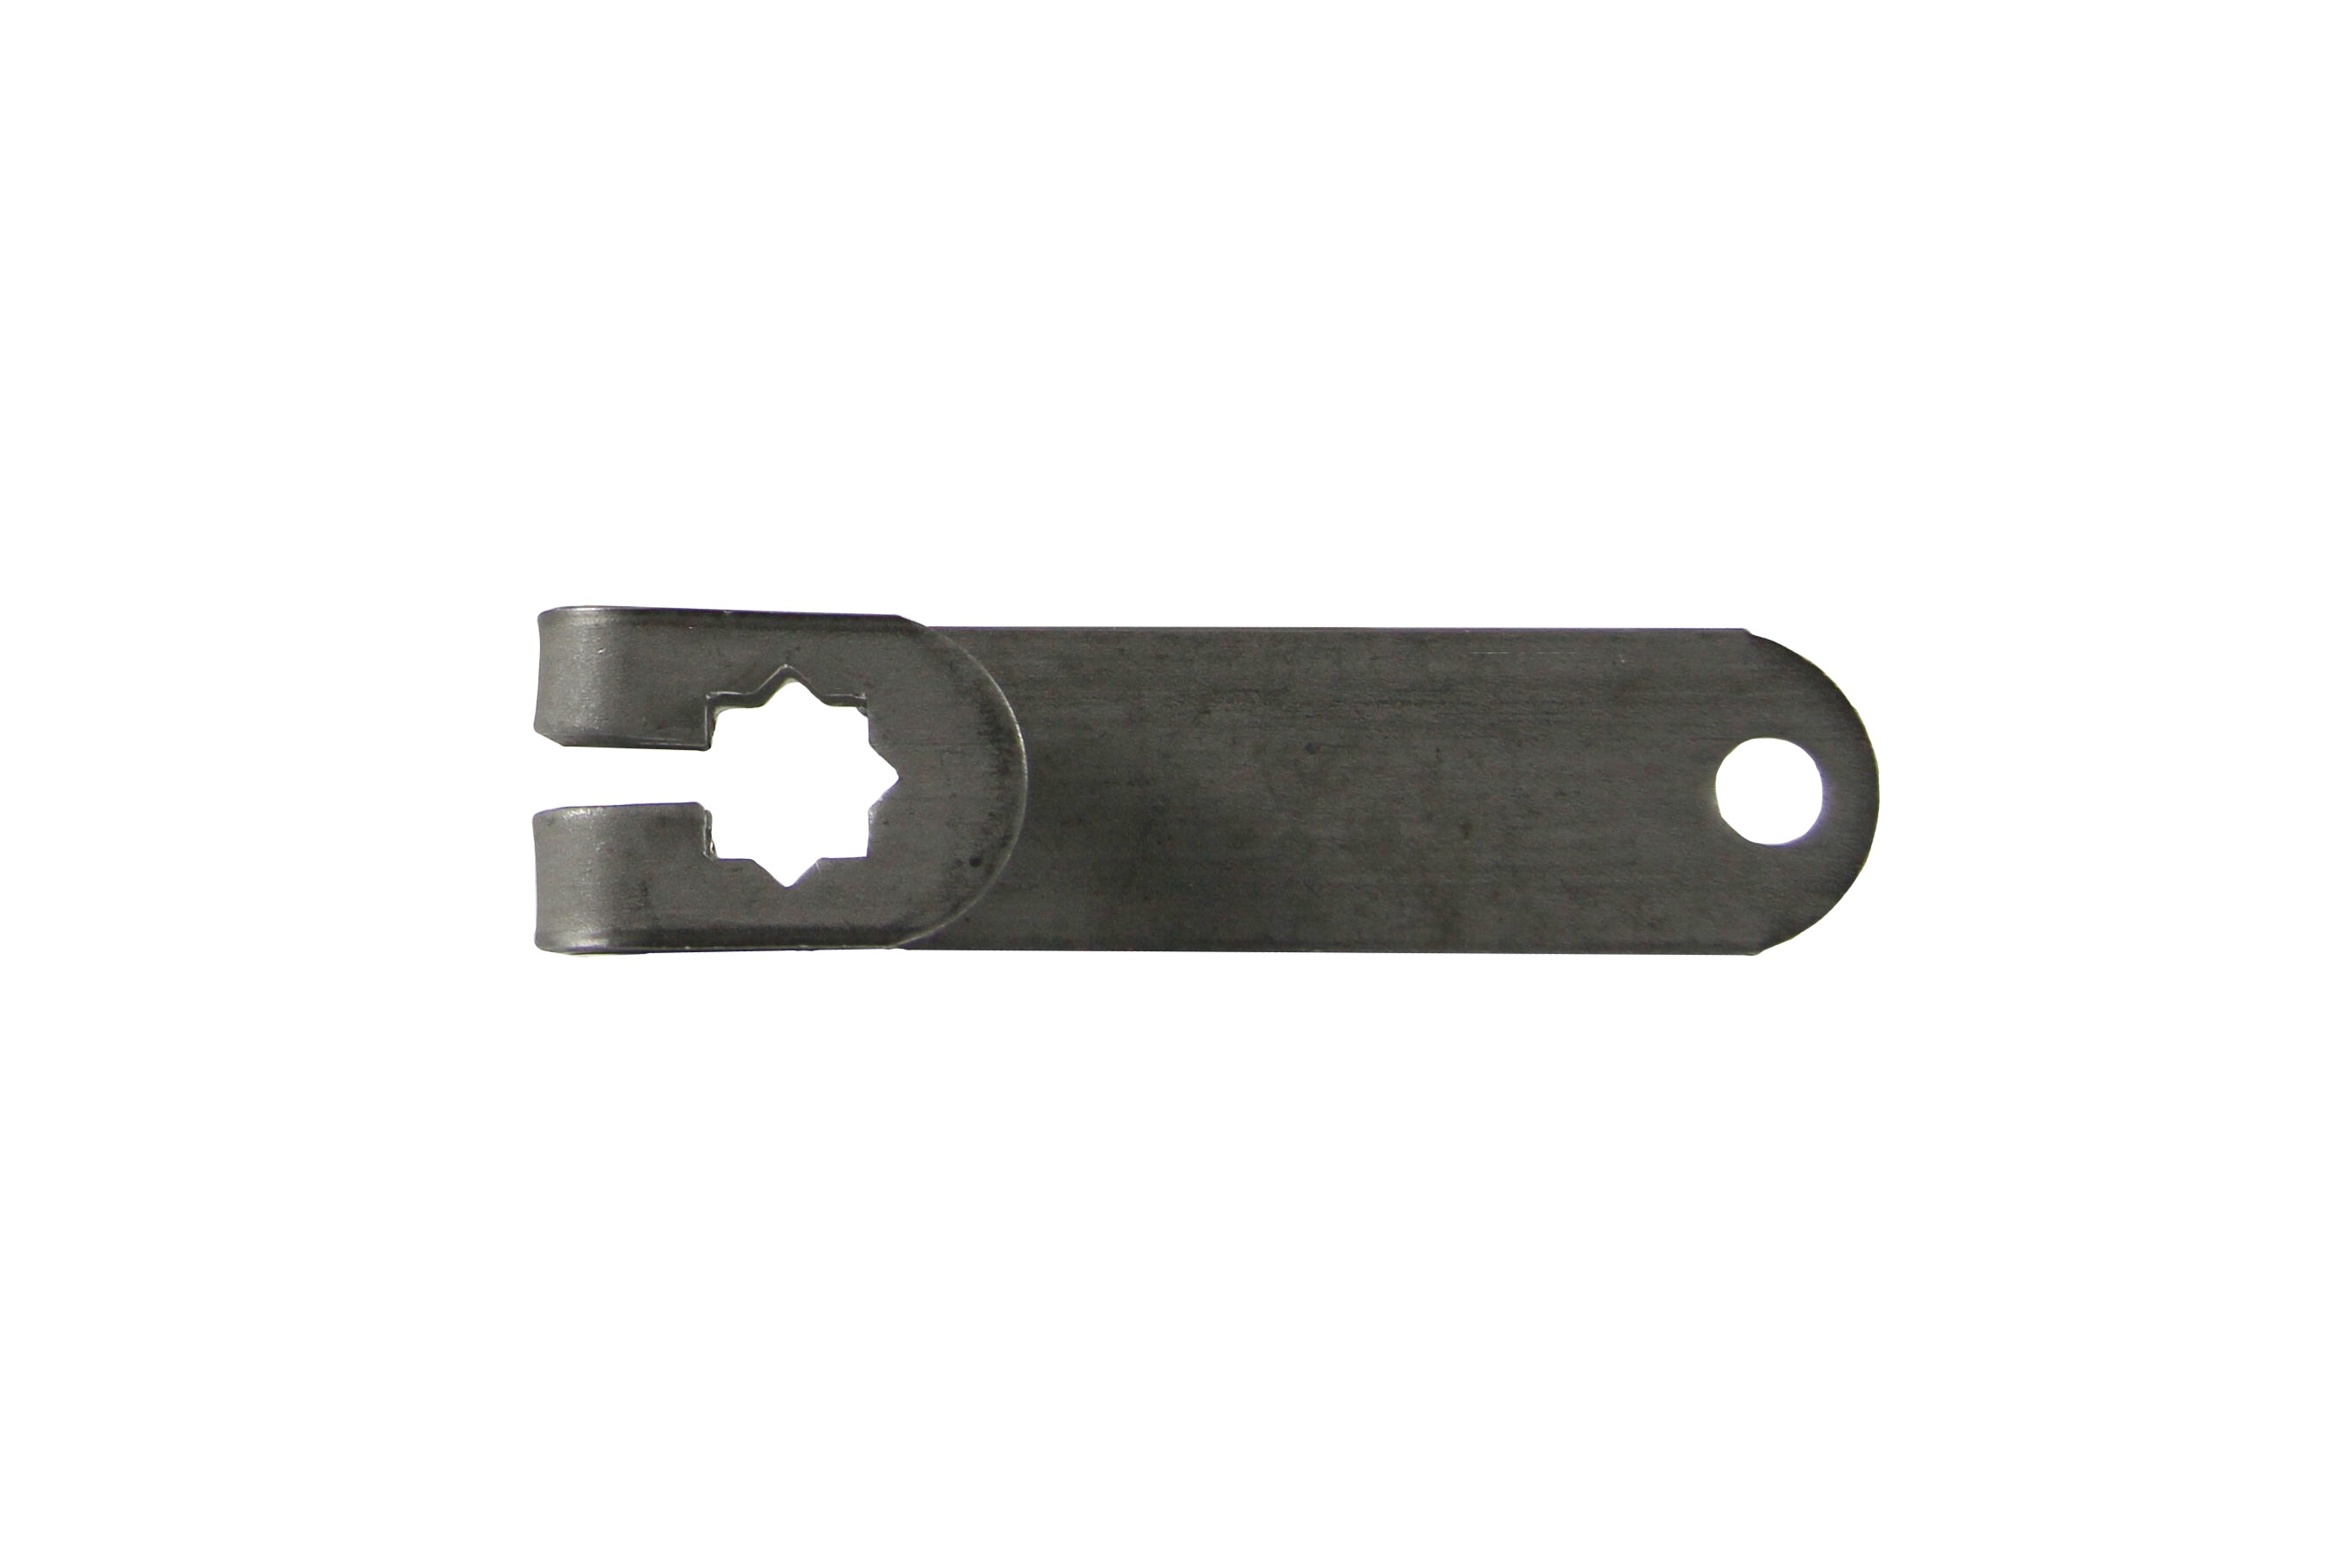 Lever - 12 x 12 mm - stainless